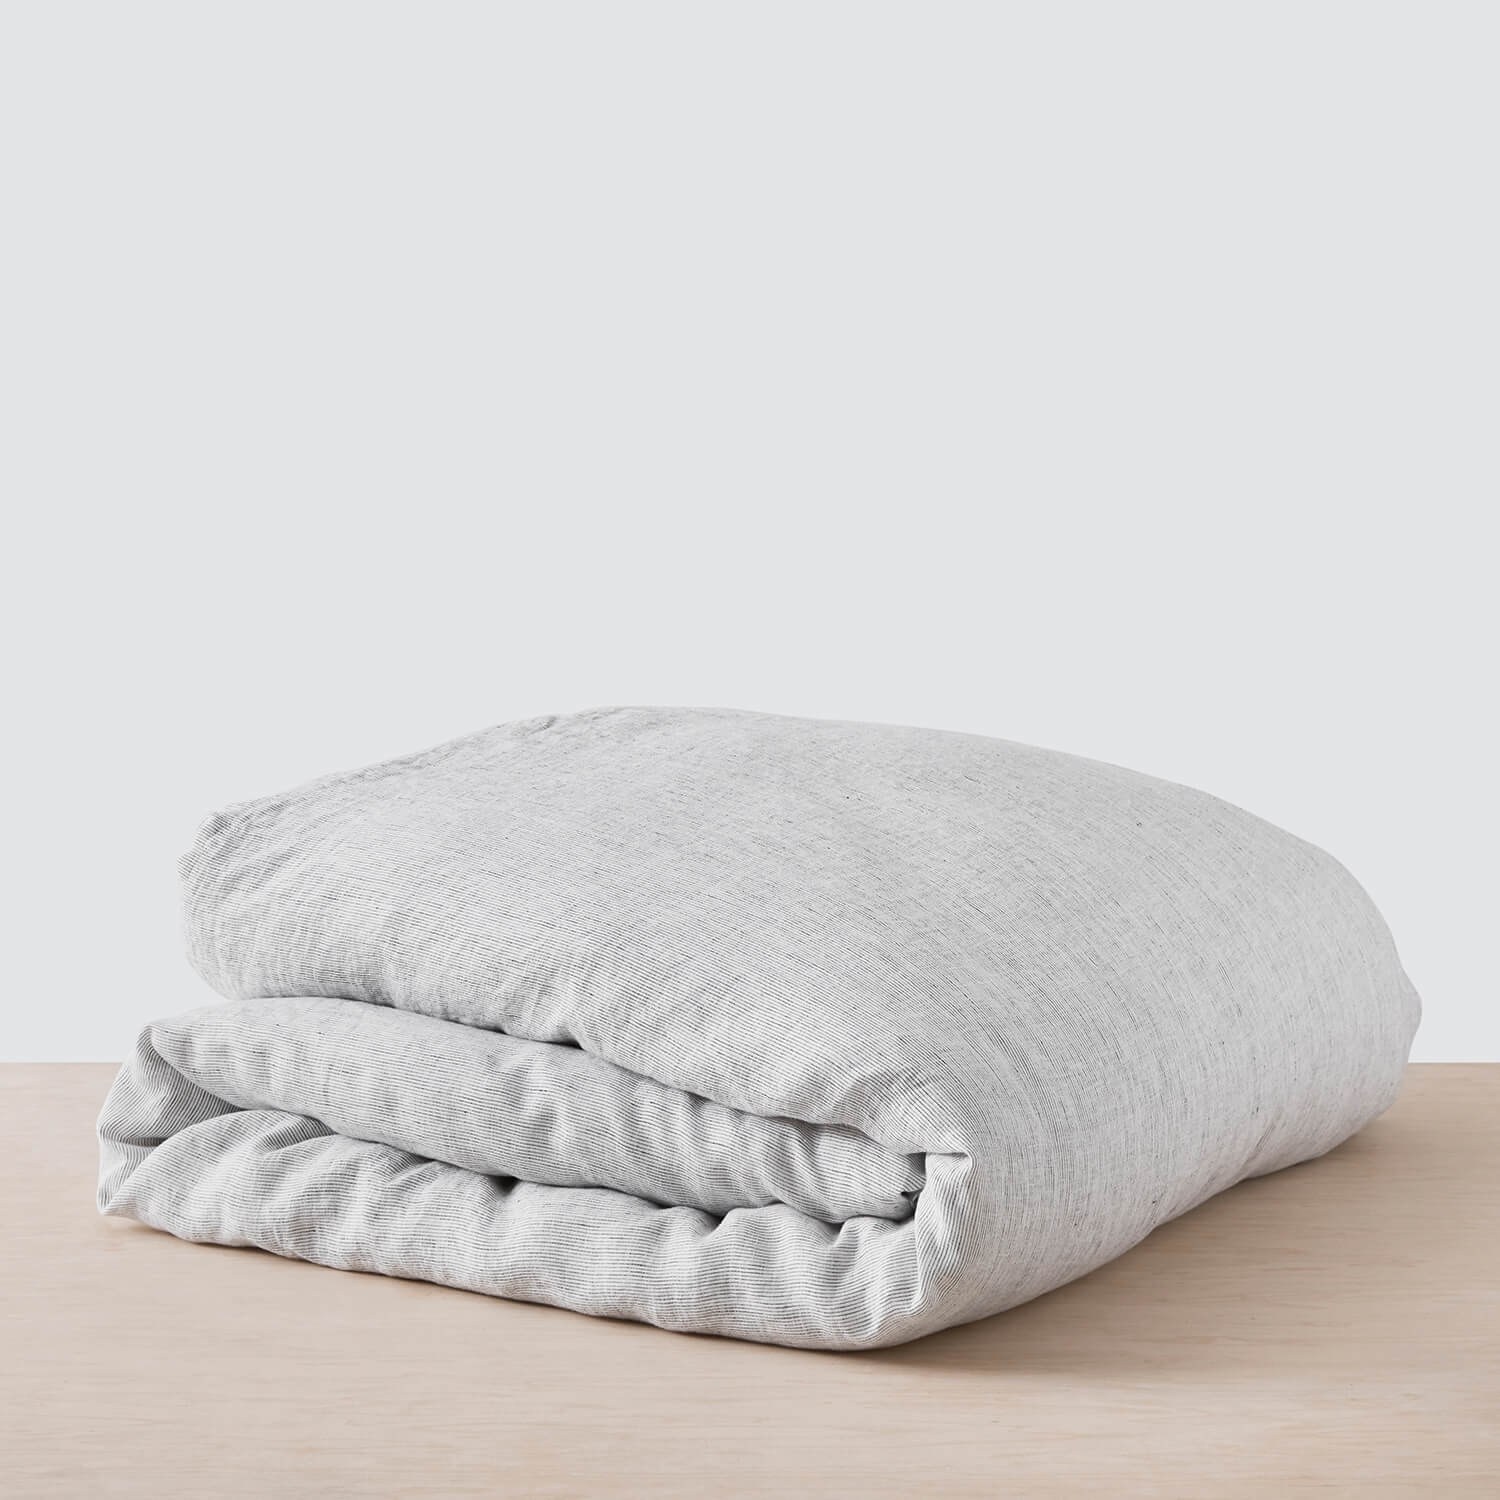 The Citizenry Stonewashed Linen Duvet Cover | King/Cal King | Duvet Only | Solid Sand - Image 2